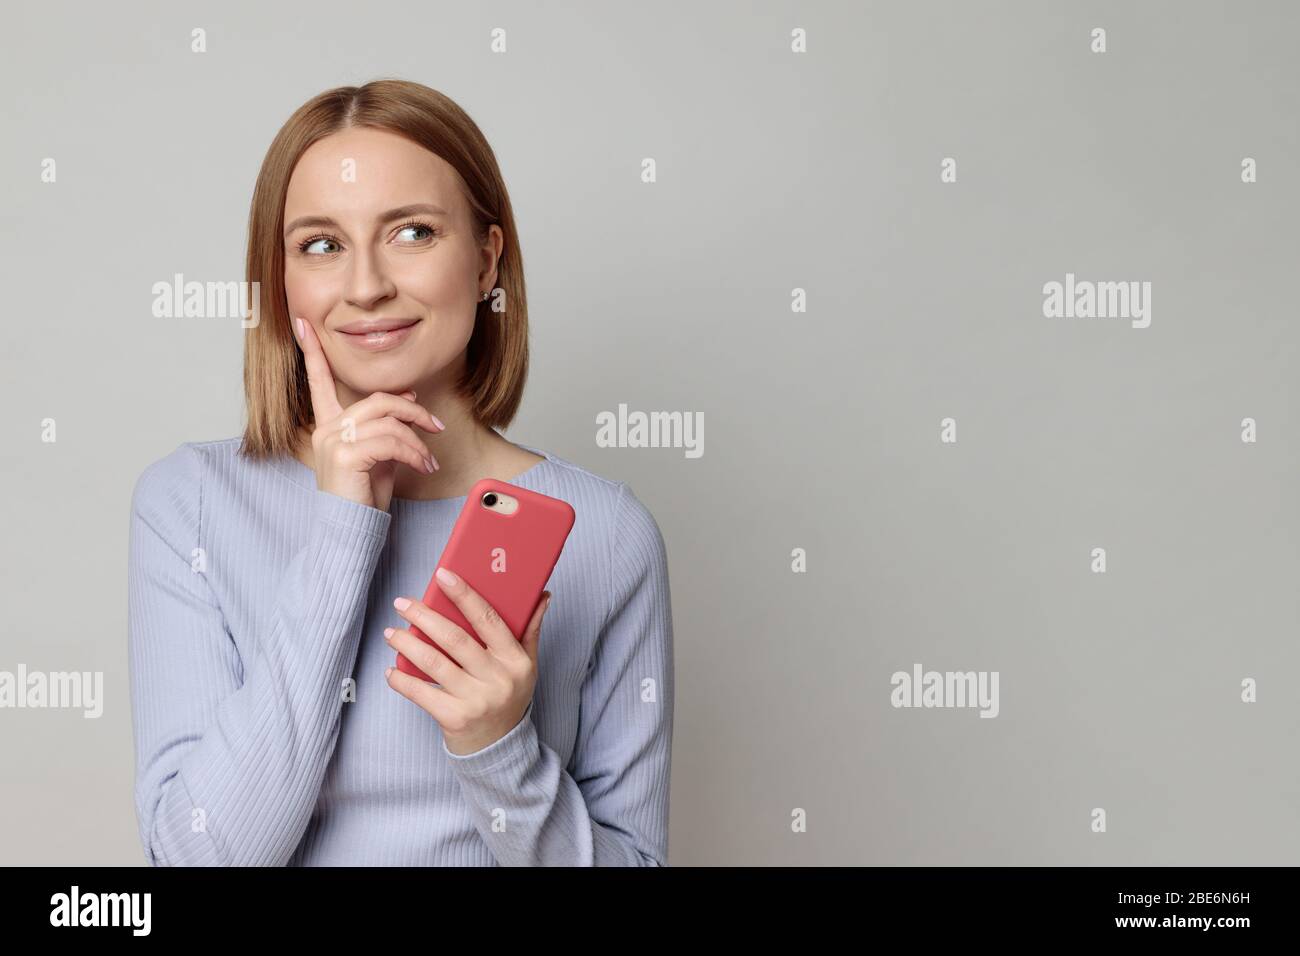 Studio portrait of pleasant cheerful lovely european woman looks up at blank copy space, holding smartphone, isolated over beige background. Positive Stock Photo